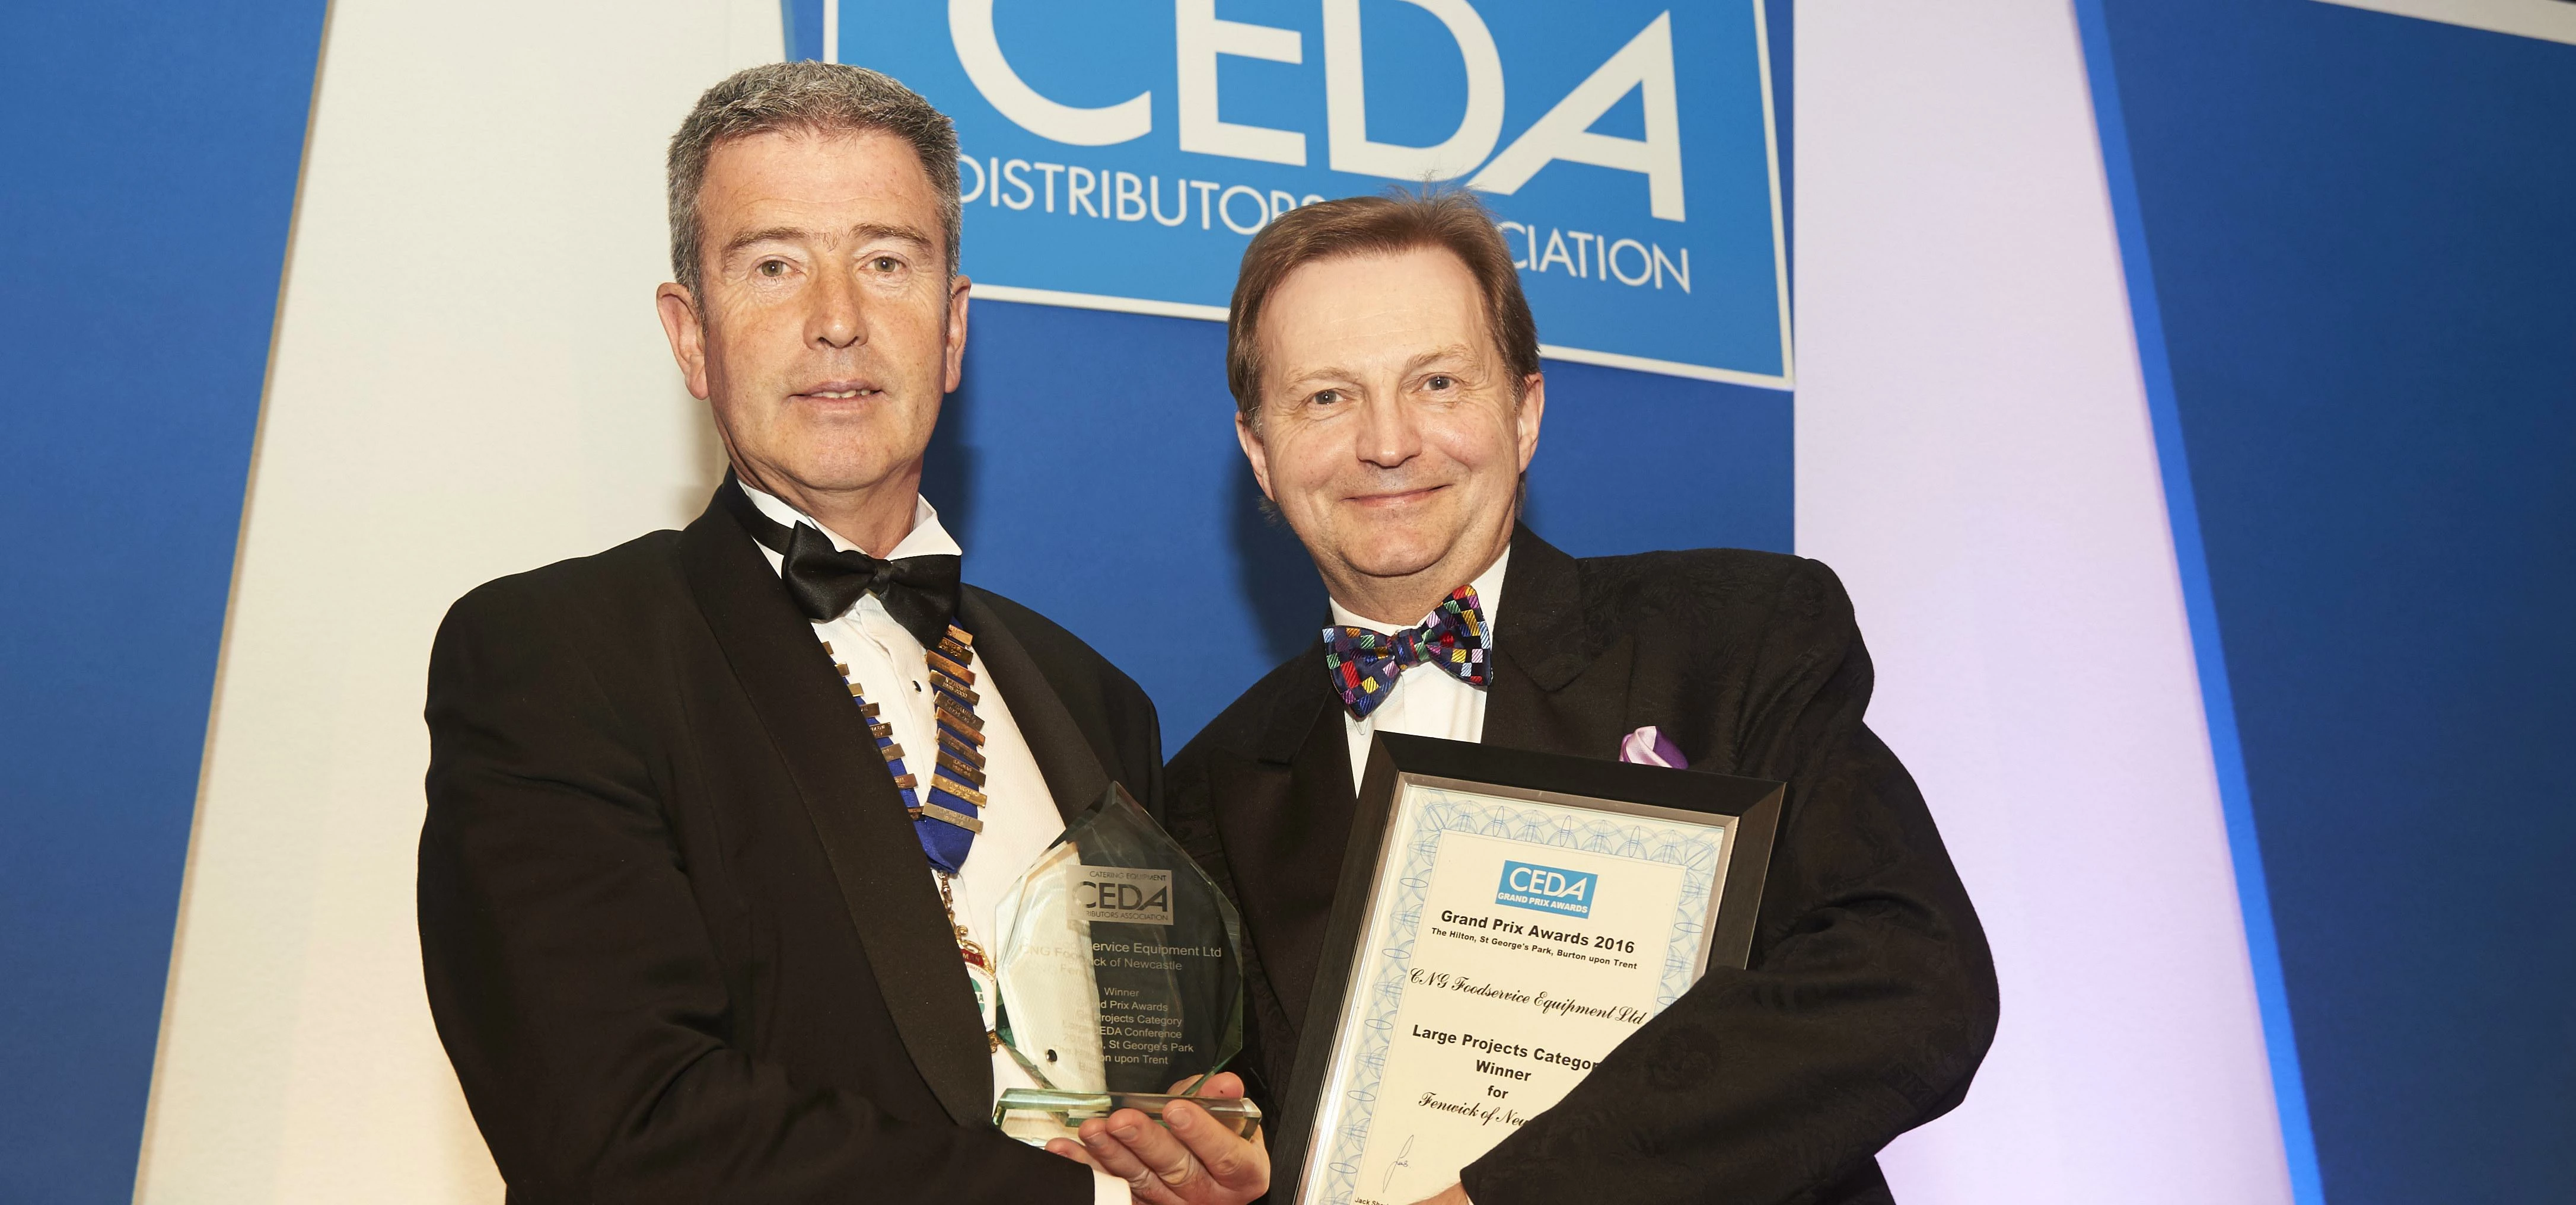 Clive Groom (right) receiving his prize for winning the Large Project Sector Award at CEDA (Catering